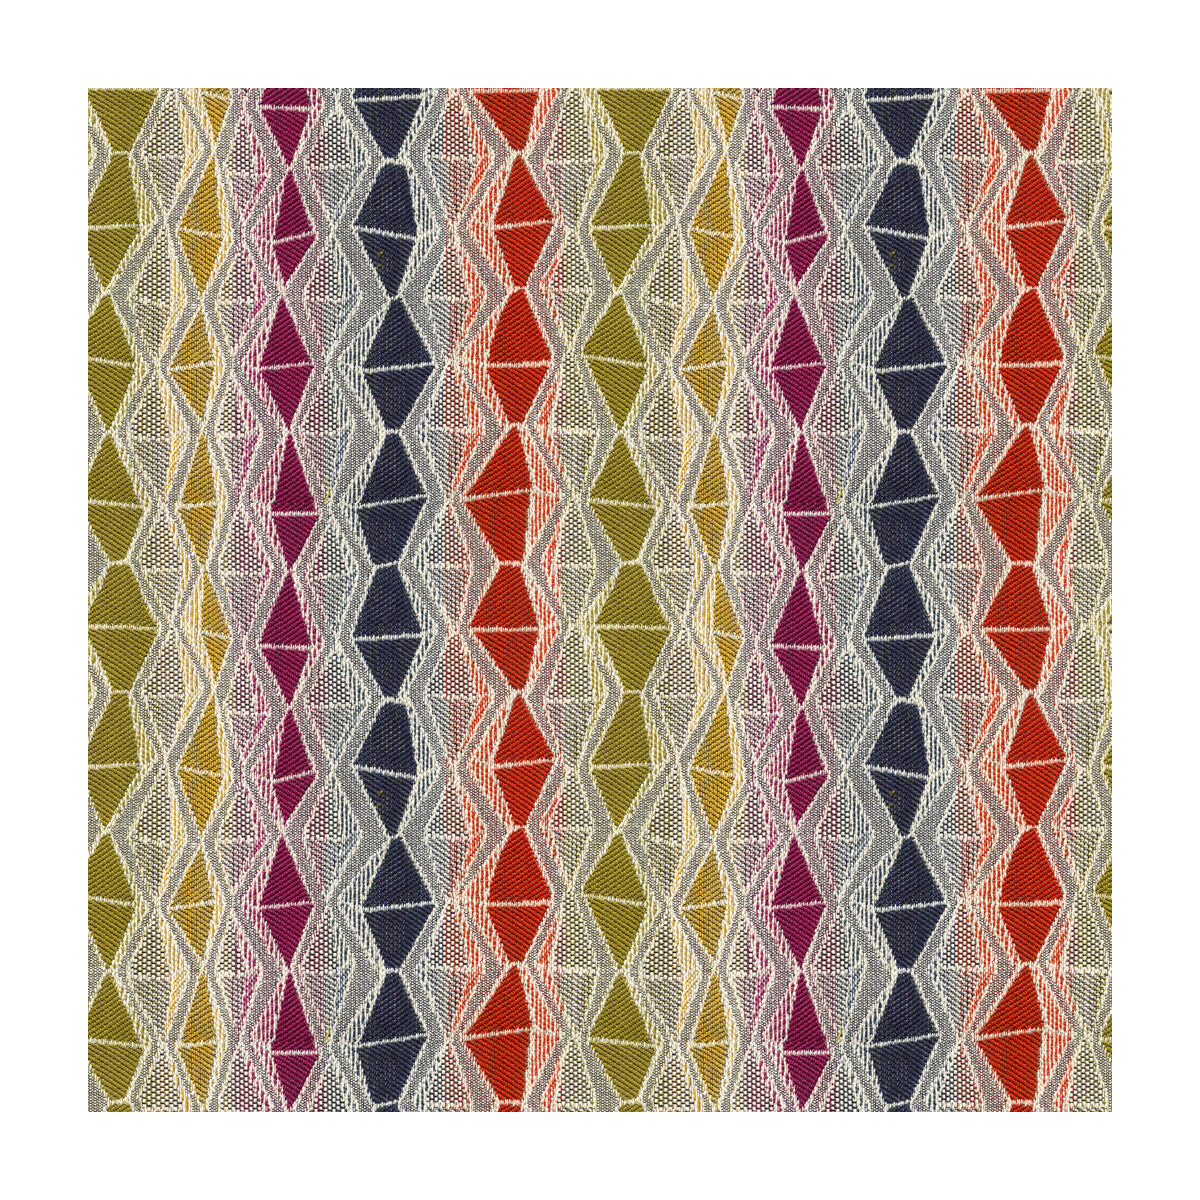 Kravet Design fabric in 33883-412 color - pattern 33883.412.0 - by Kravet Design in the Tanzania J Banks collection